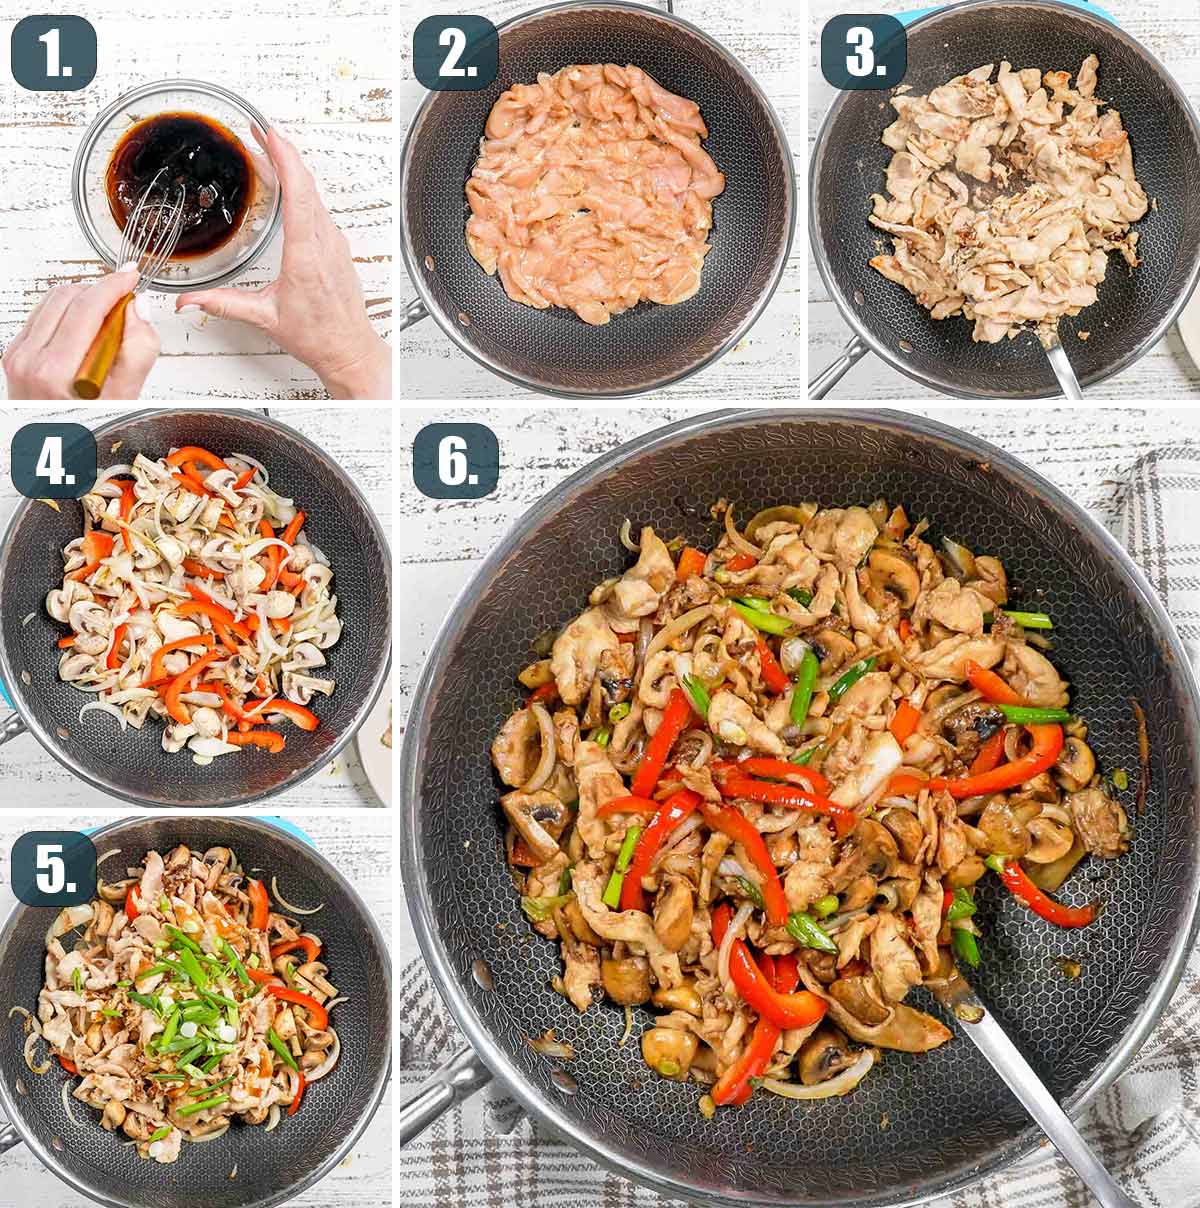 detailed process shots showing how to make chicken mushroom stir fry.